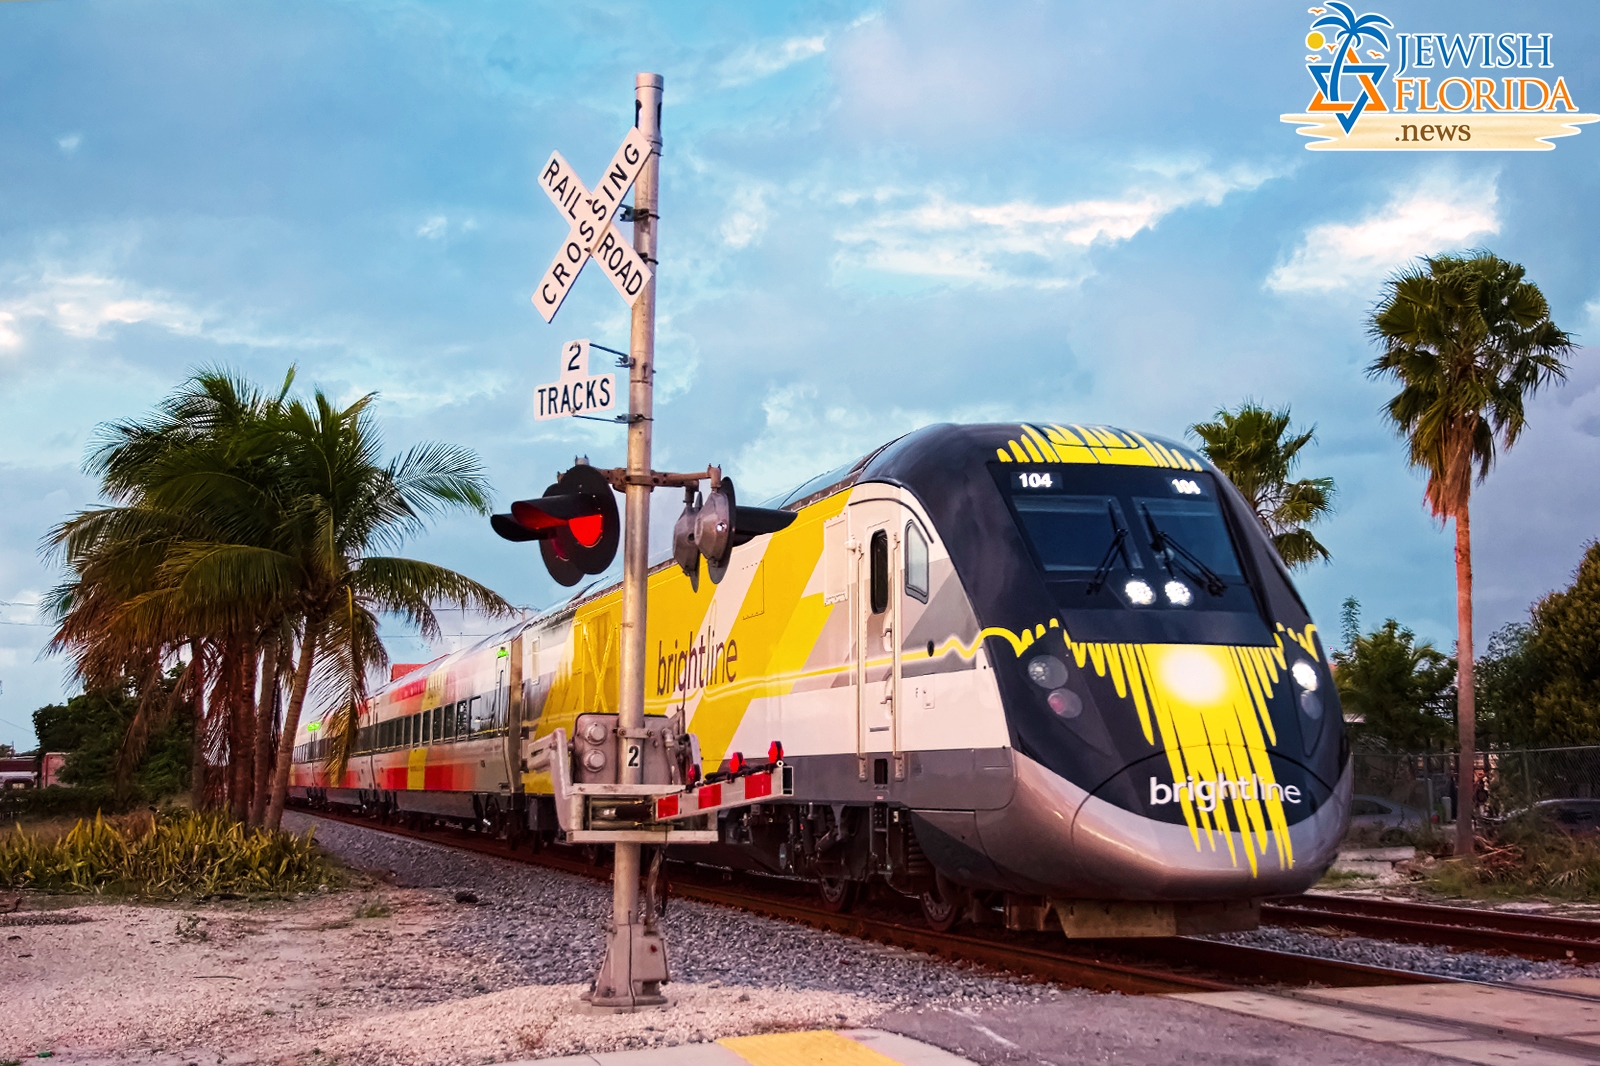 BRIGHTLINE TRAINS COMPLETE TESTING SCHEDULE BEGINS OCT. 15 IN SOUTH FLORIDA